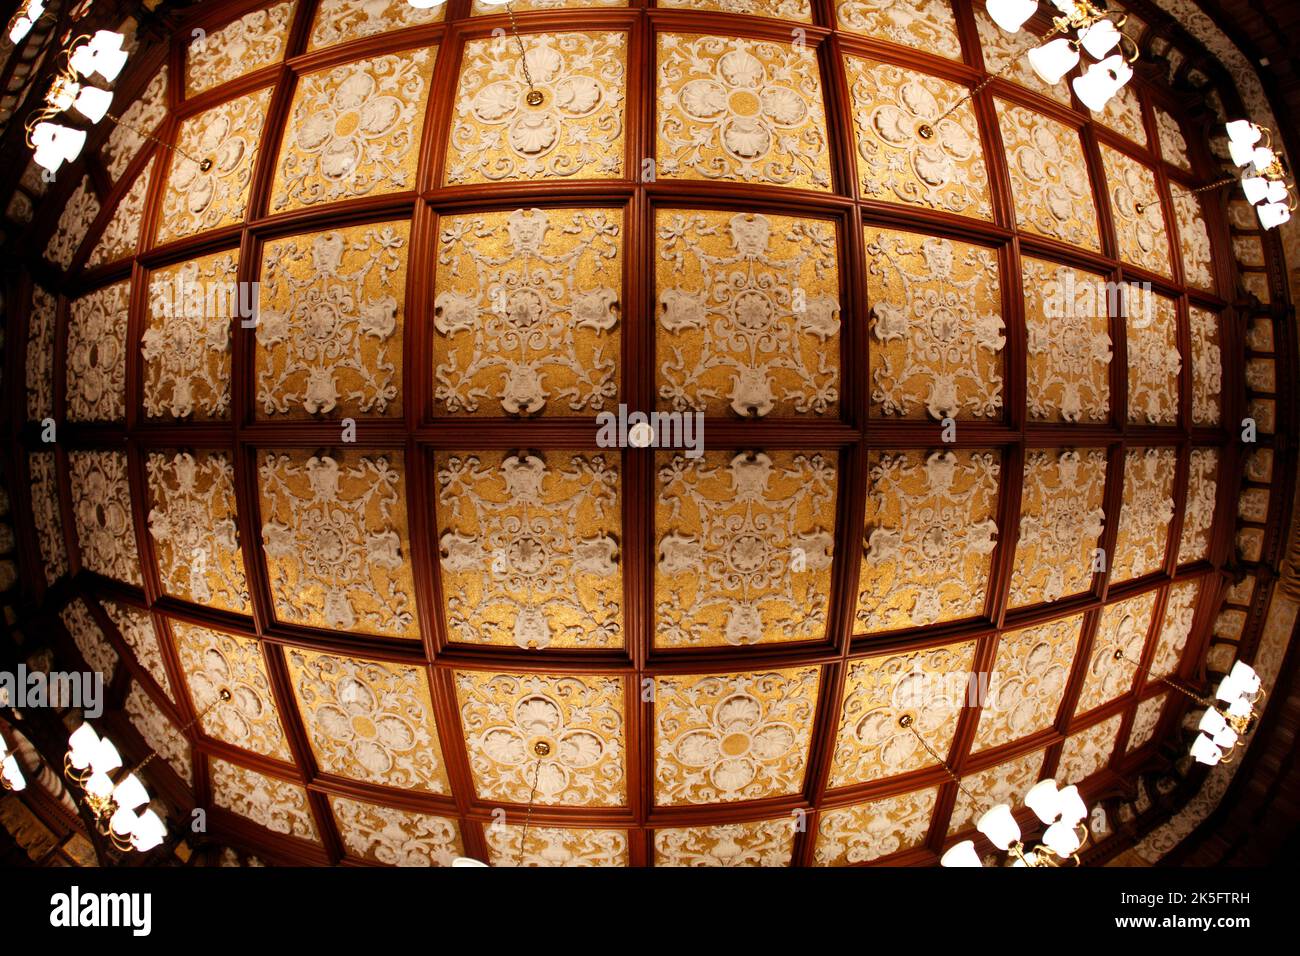 Ornate decorative plaster work ceiling in the Ballroom at Bletchley Park. Home to MI6 and the codebreakers in WWII. Stock Photo